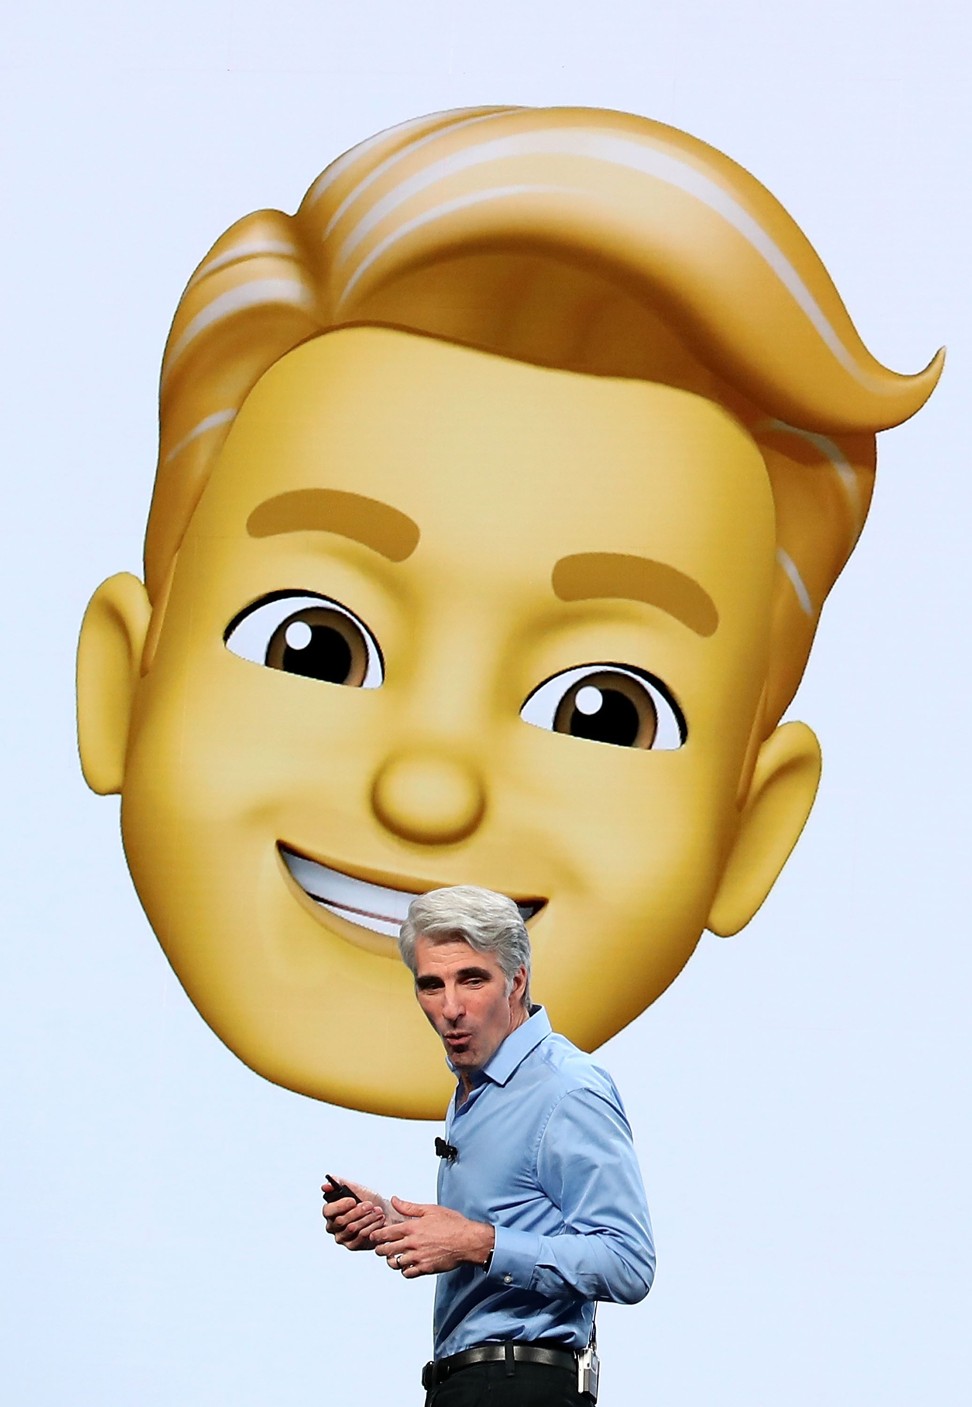 Apple’s senior vice president of software engineering Craig Federighi speaks during the 2018 conference in San Jose, California. Photo: AFP